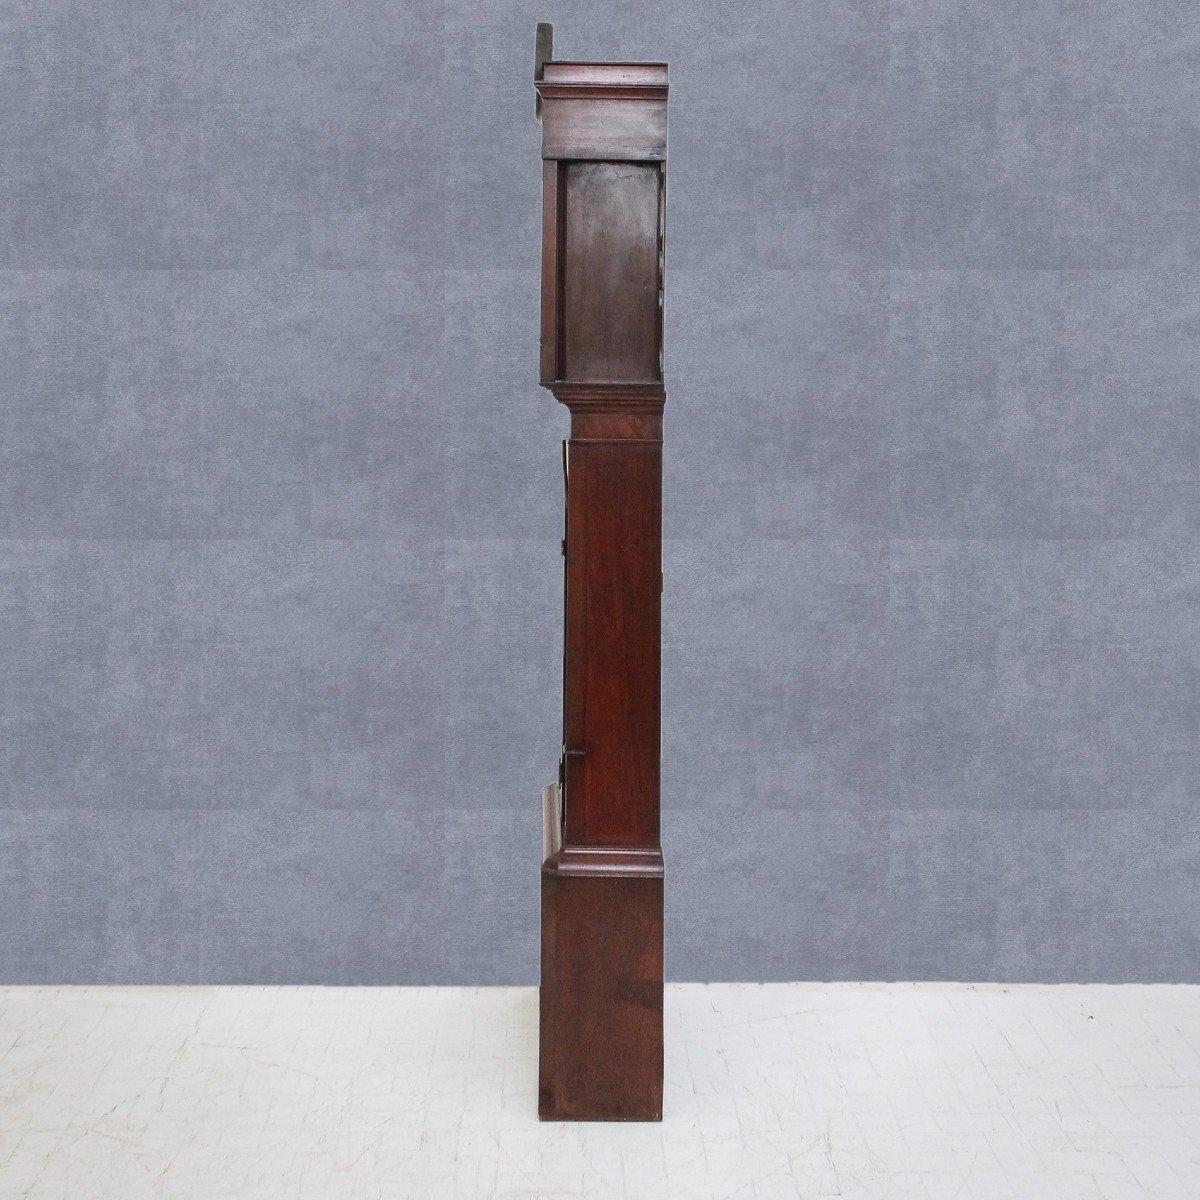 Large And Beautiful George III Style Mahogany Clock, Late 1700s Early 1800s.-photo-6